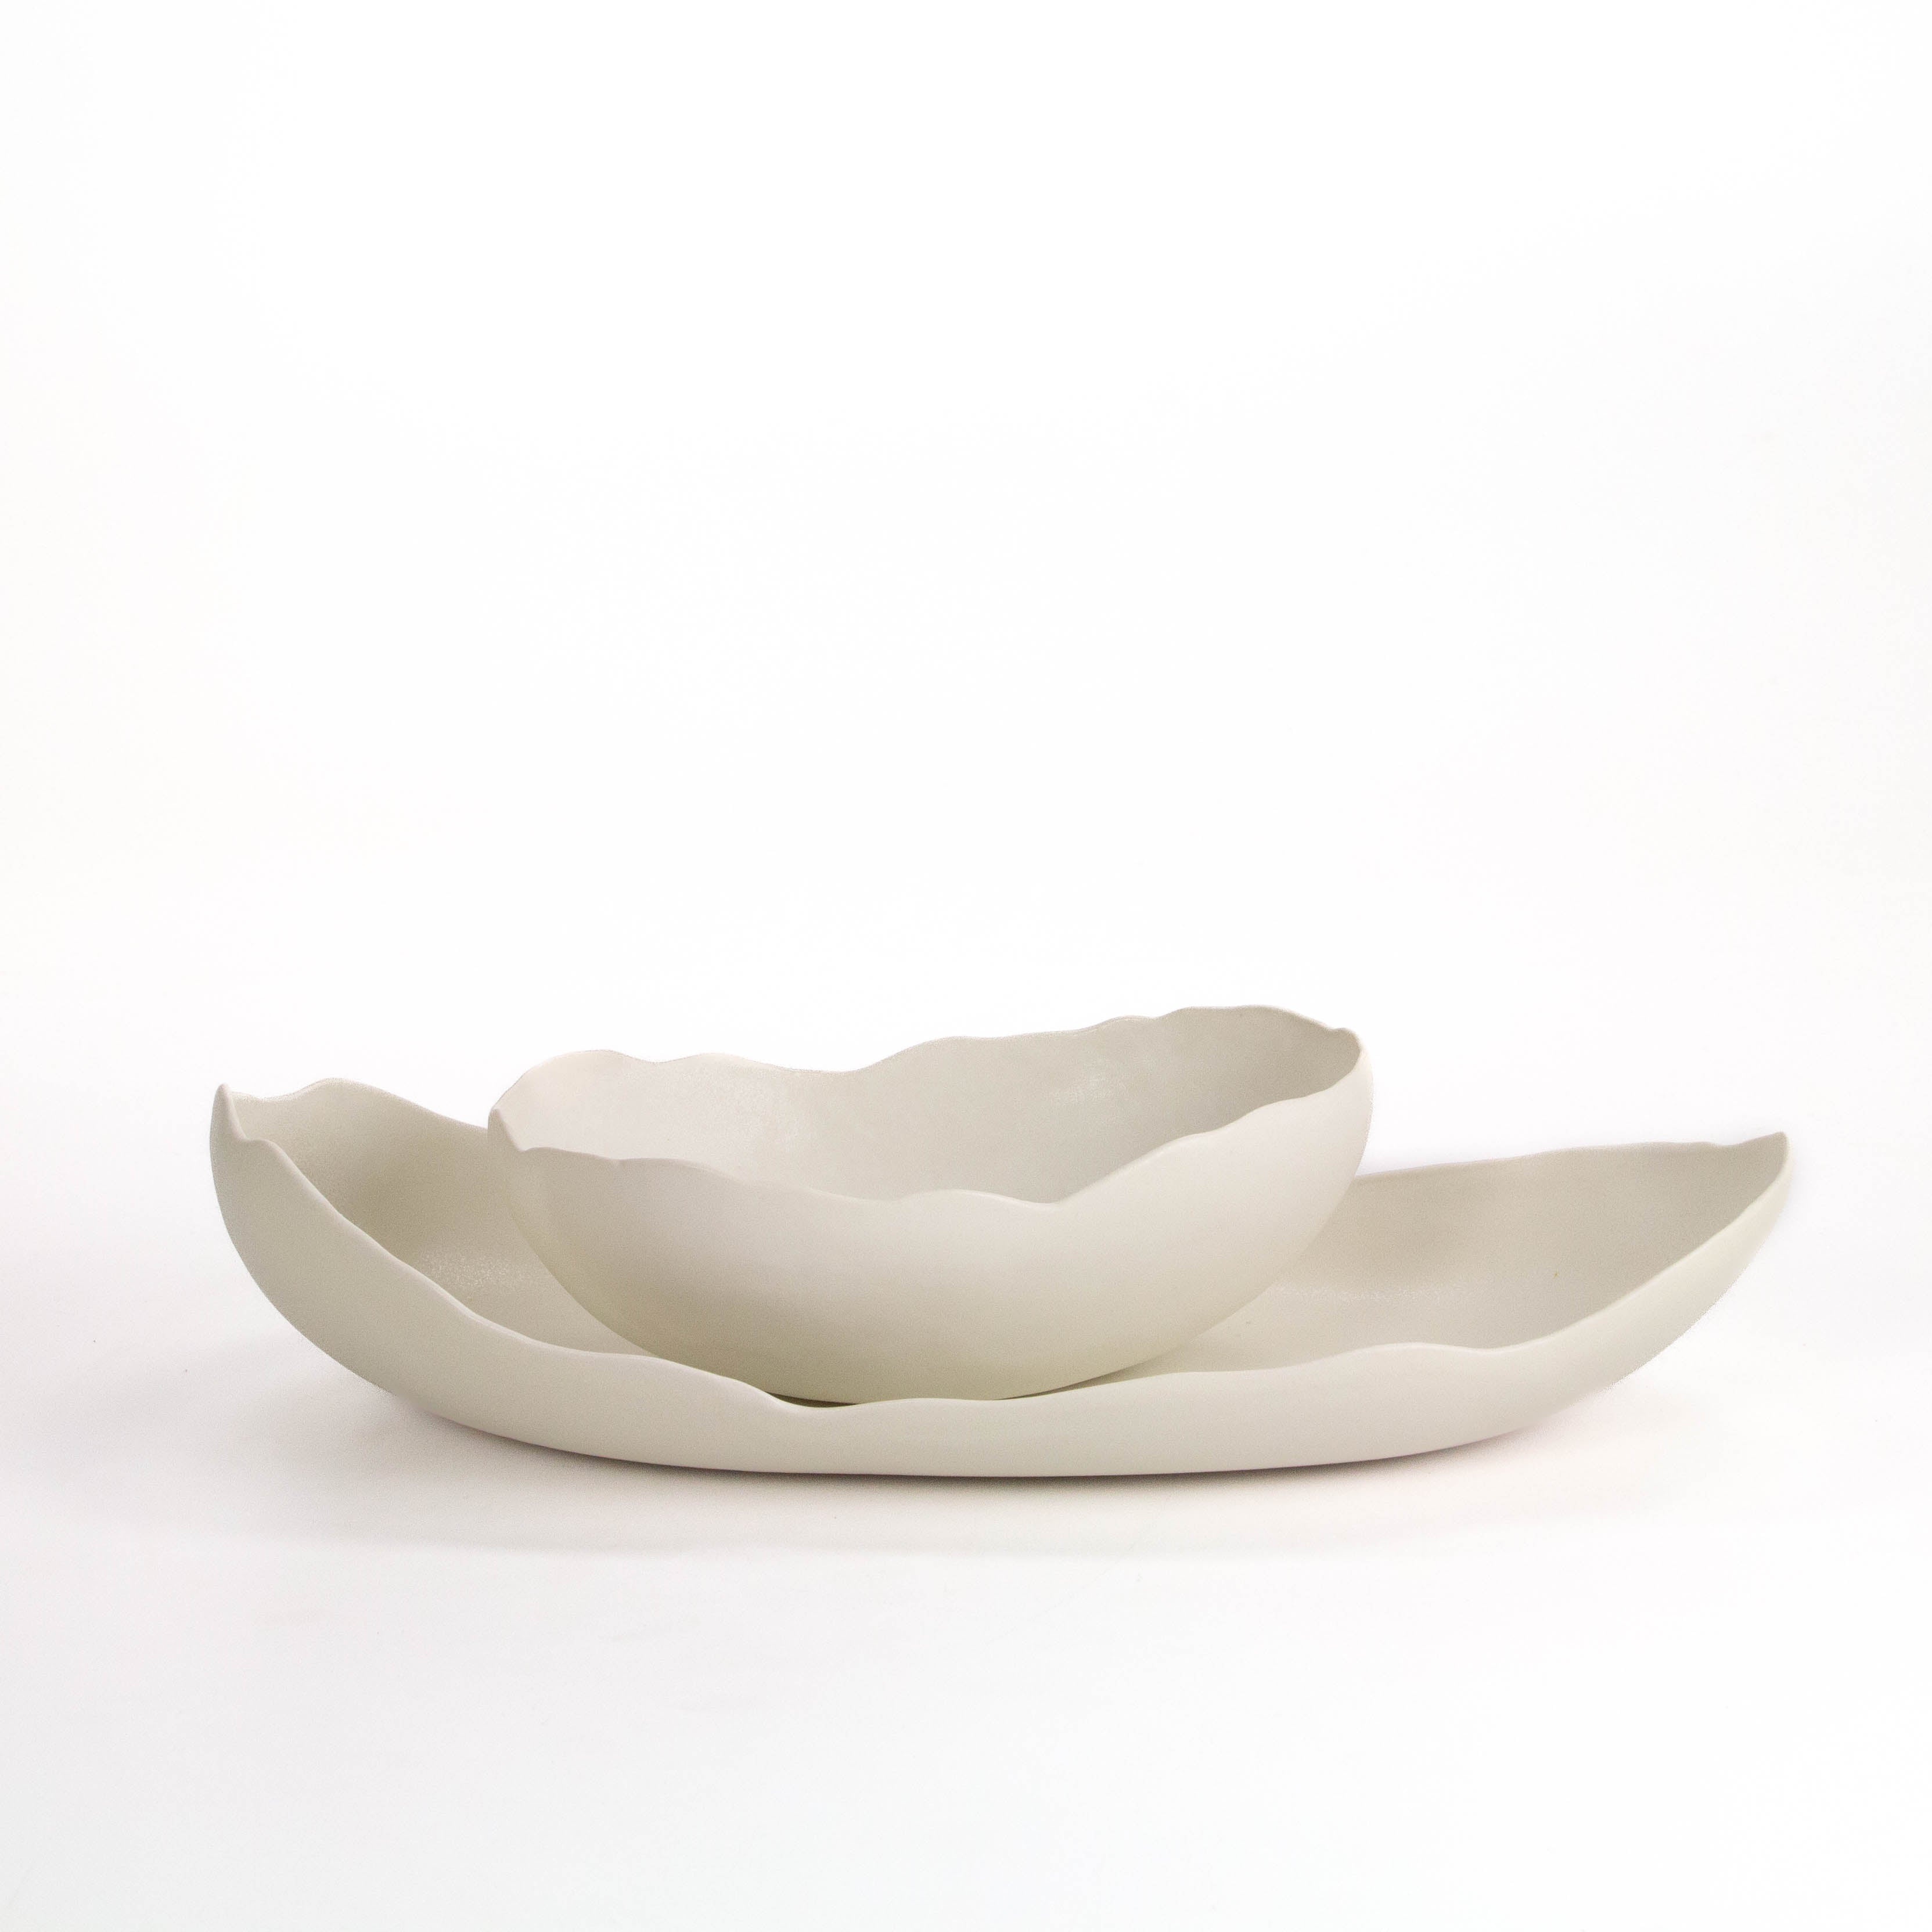 White Appetizer Bowl with Tray